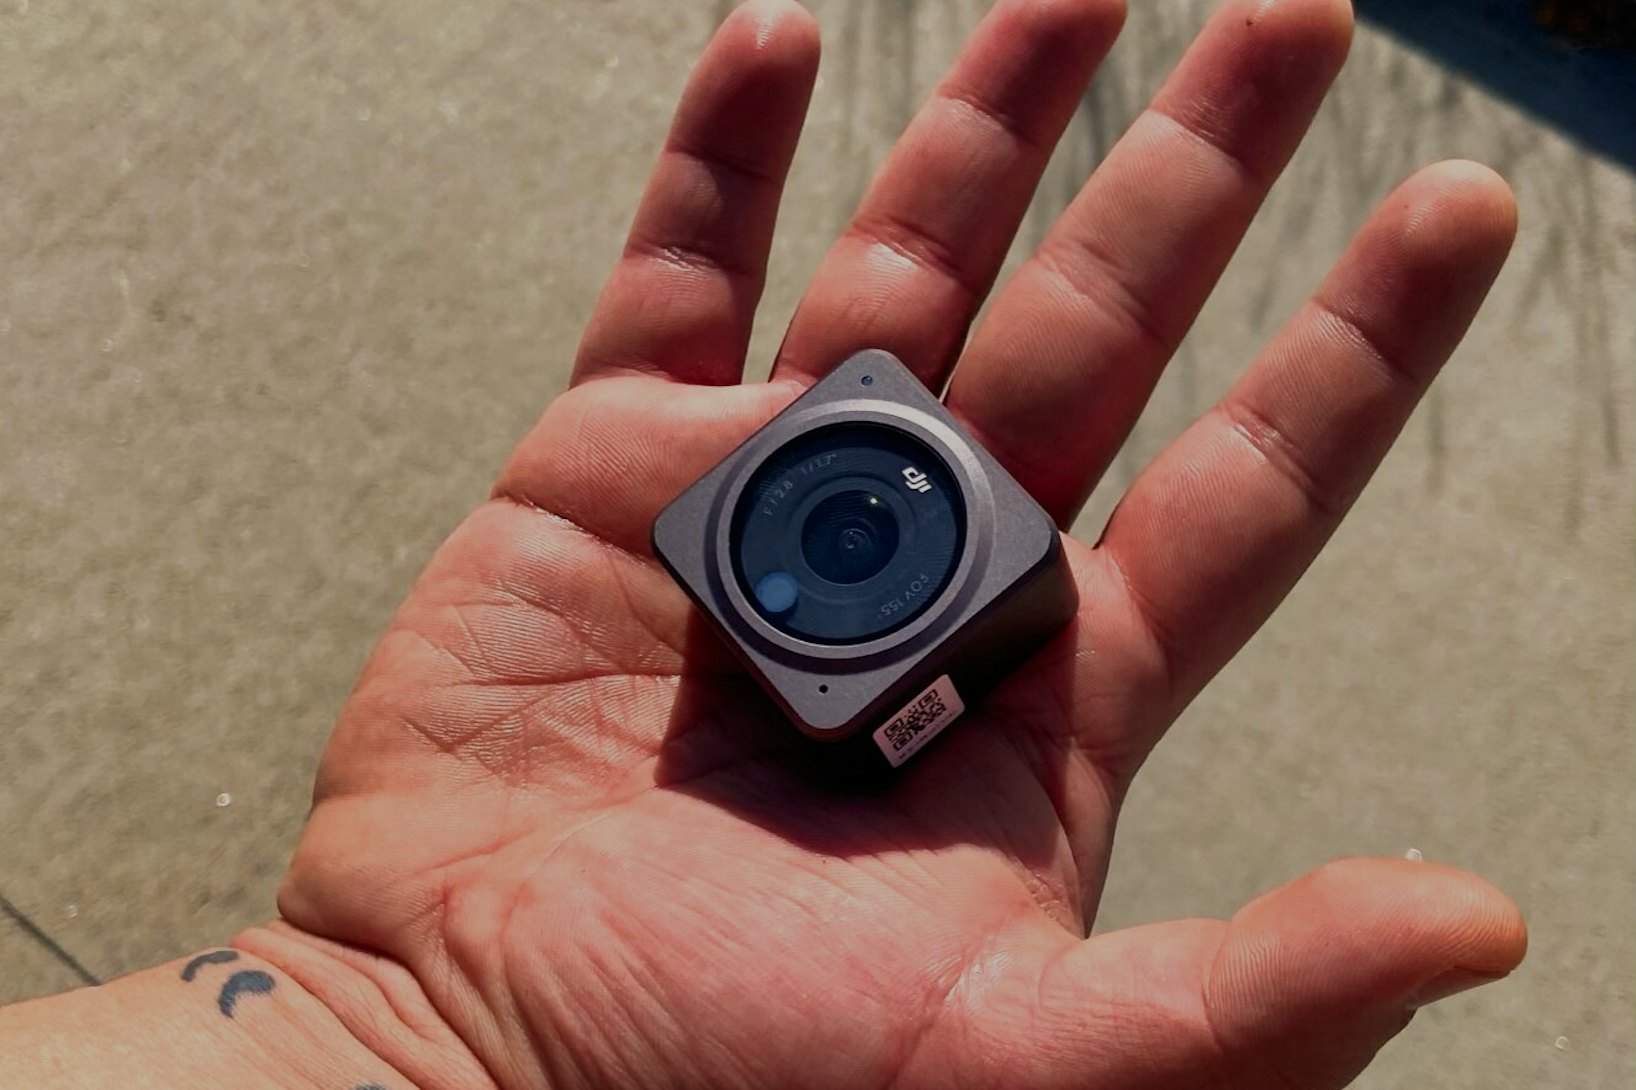 DJI Action 2 review: Is this modular action cam the GoPro killer?